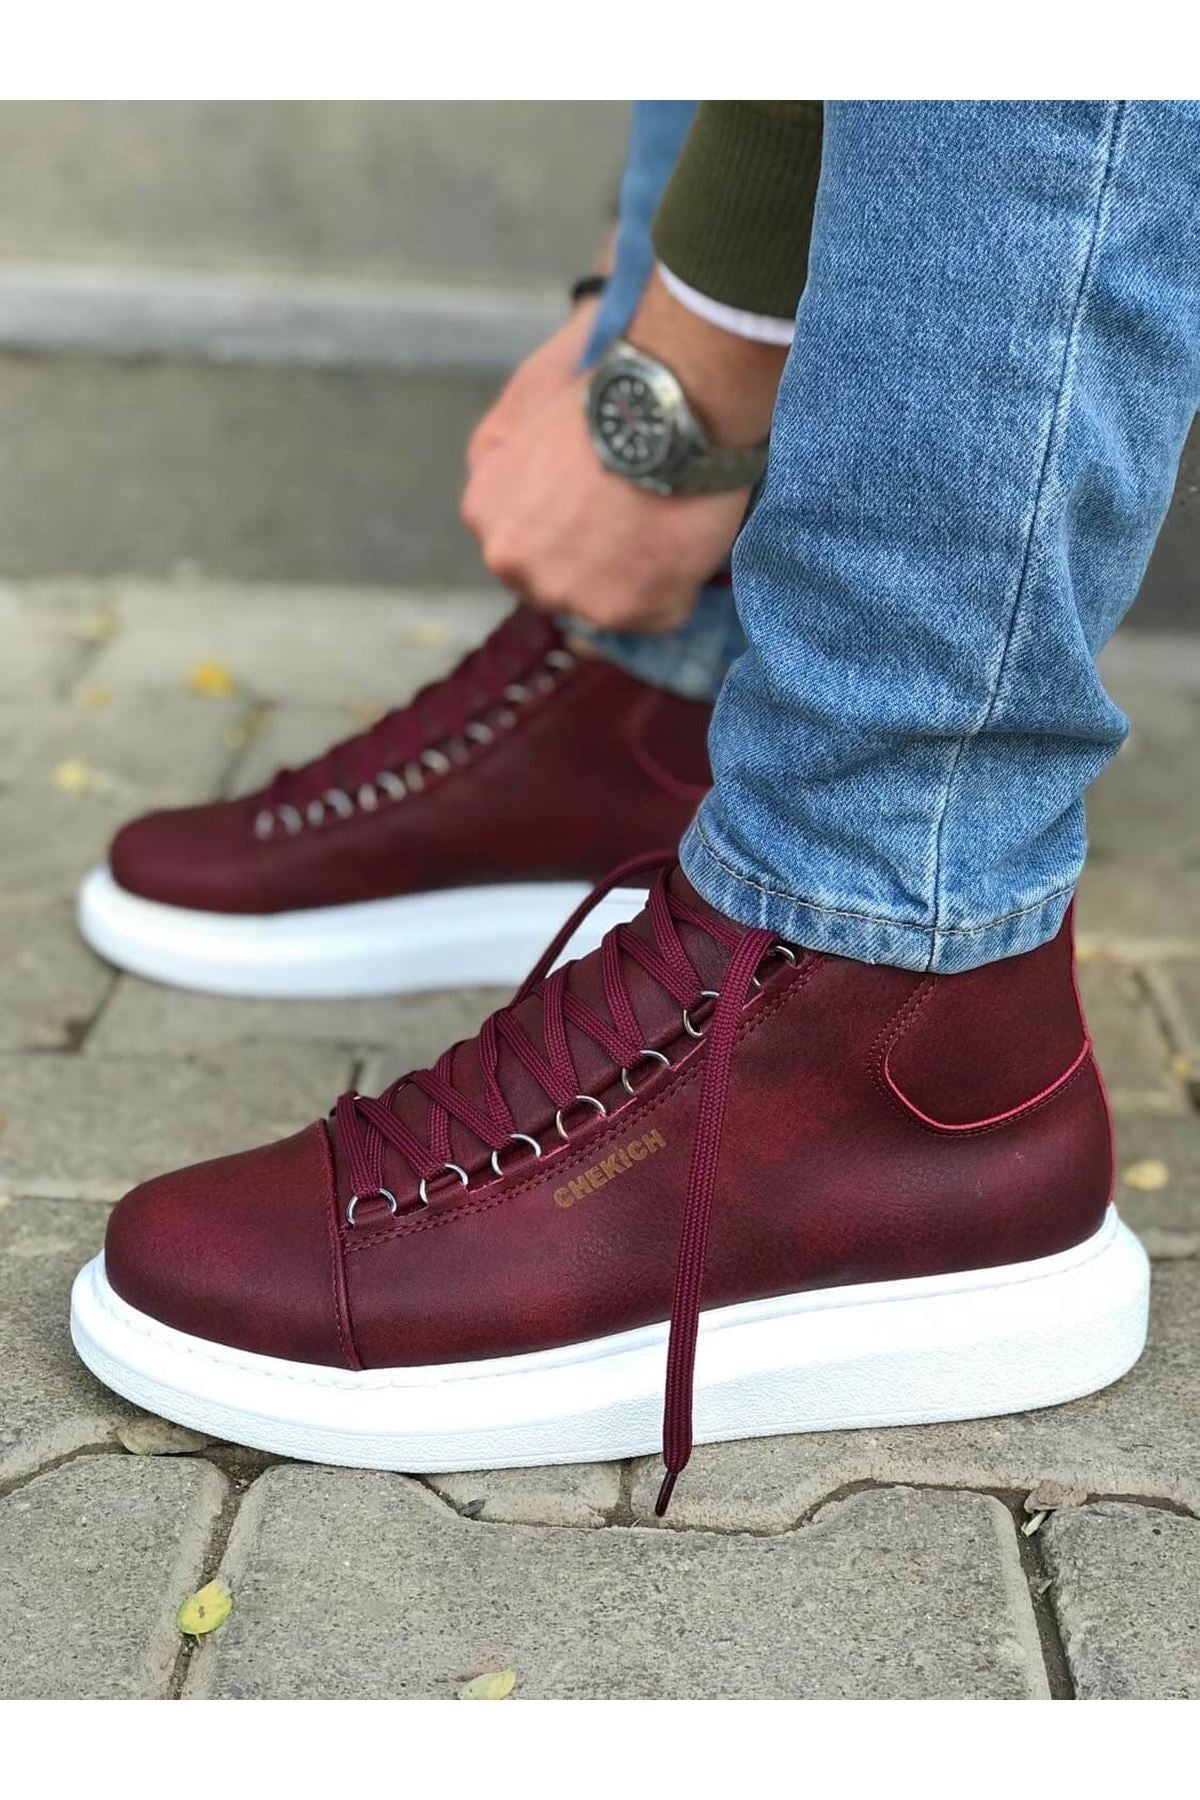 CH258 Men's Burgundy-White Sole Metal Slug Lace-up High Sole Casual Sneaker Sports Boots - STREETMODE ™